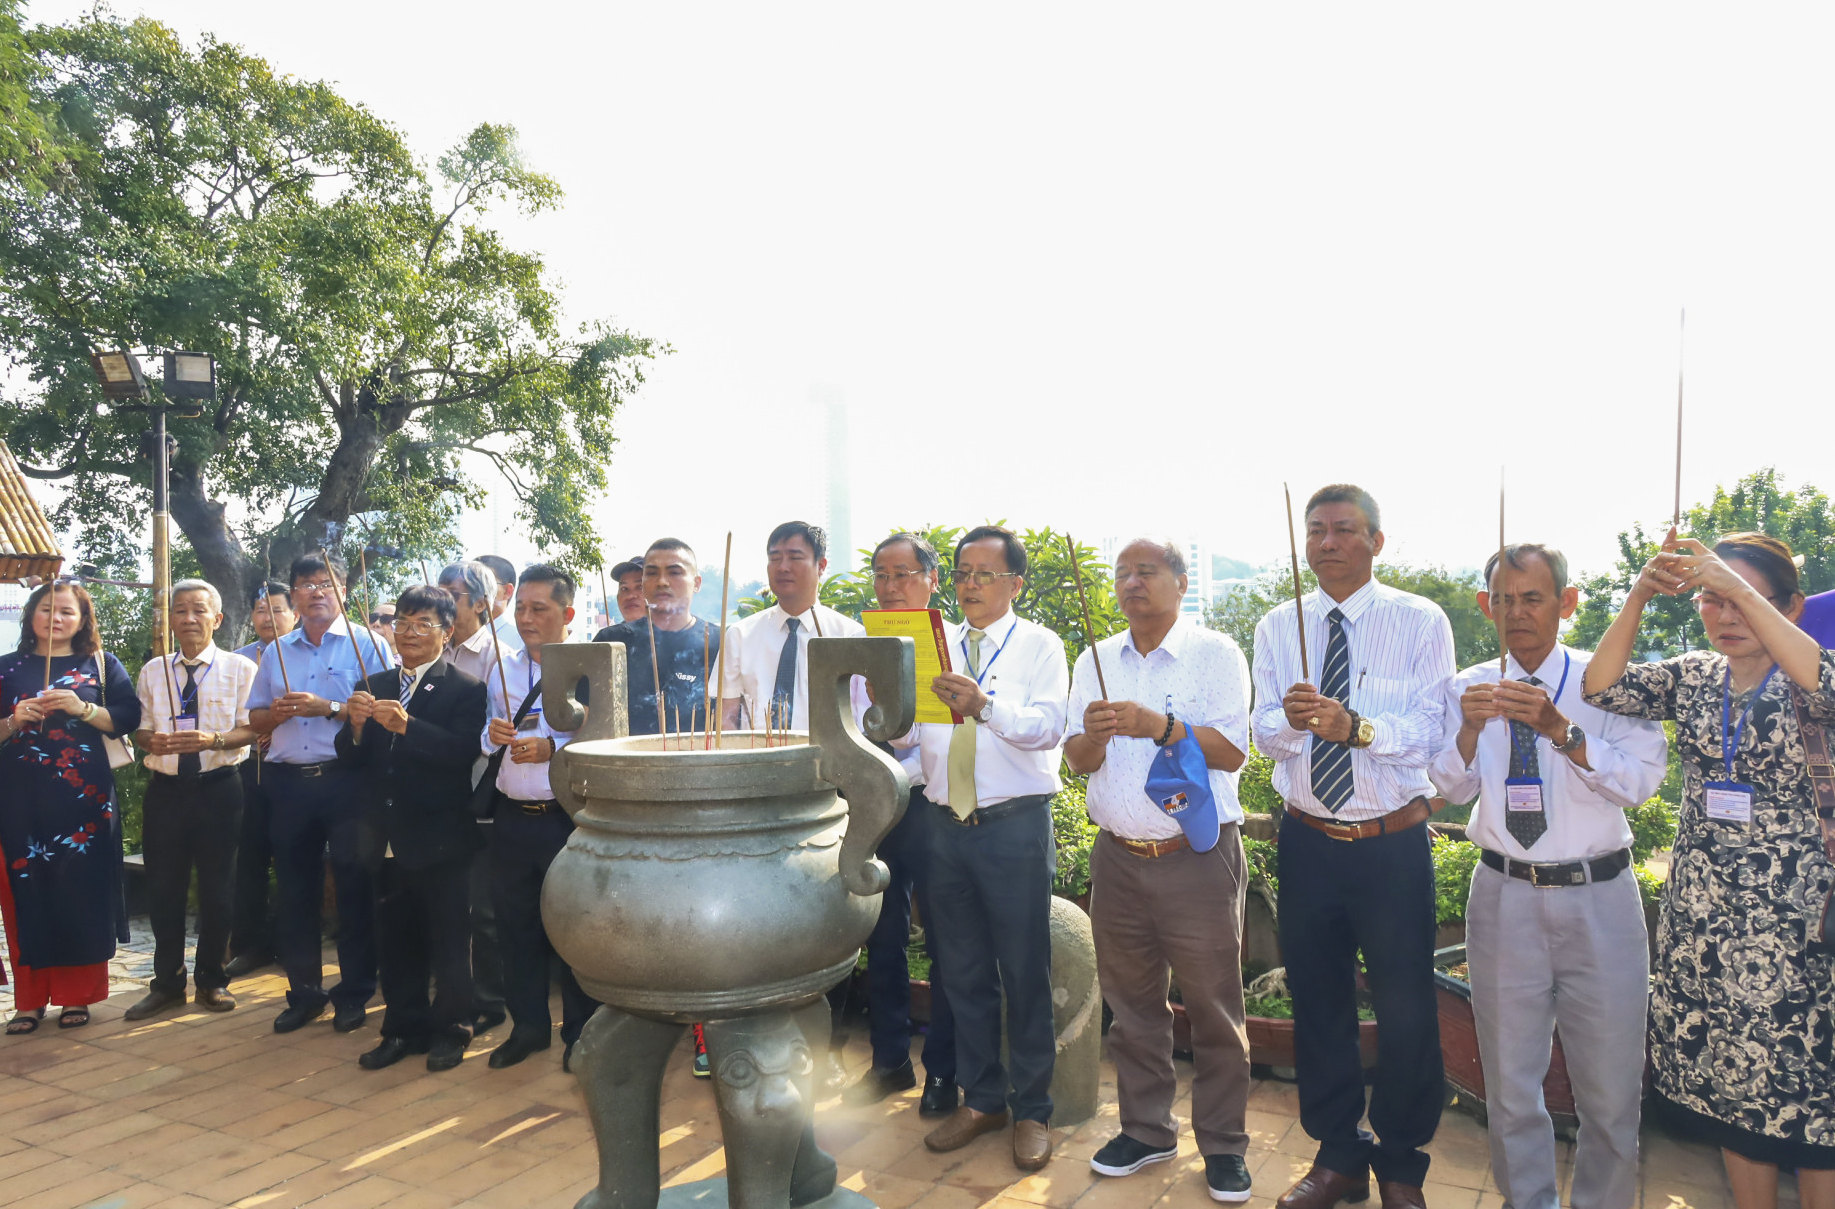 The representatives and members of Khanh Hoa Province’s Aloeswood Association offering incense at Ponagar Temple

